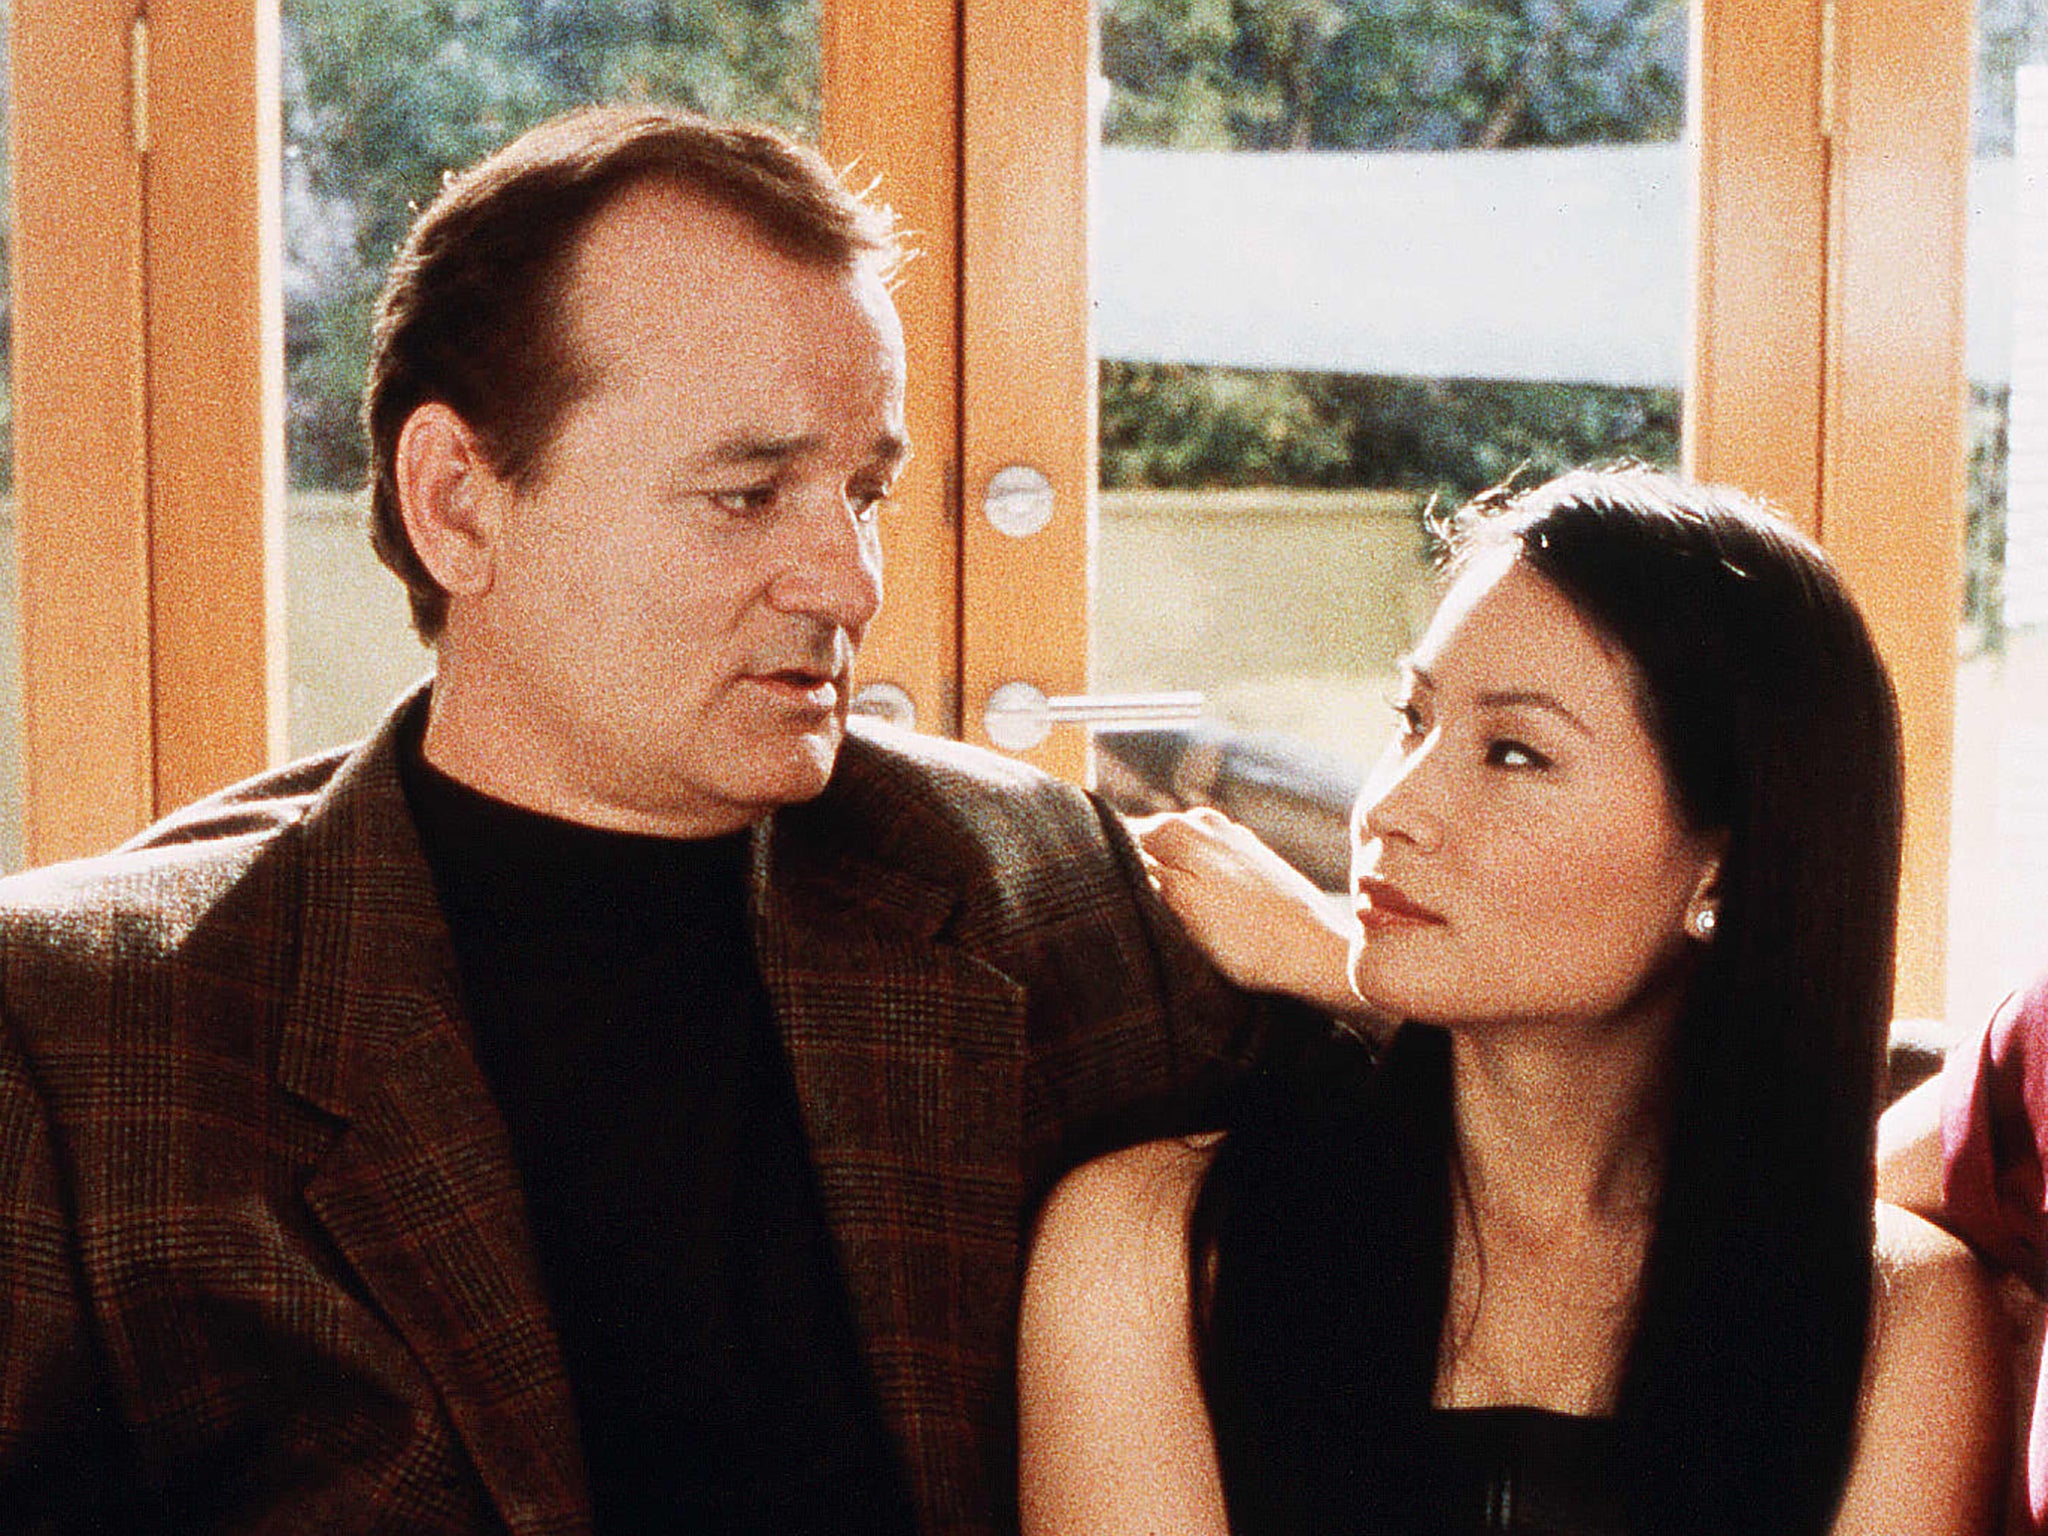 Off-camera feud: Bill Murray and Lucy Liu in ‘Charlie’s Angels'